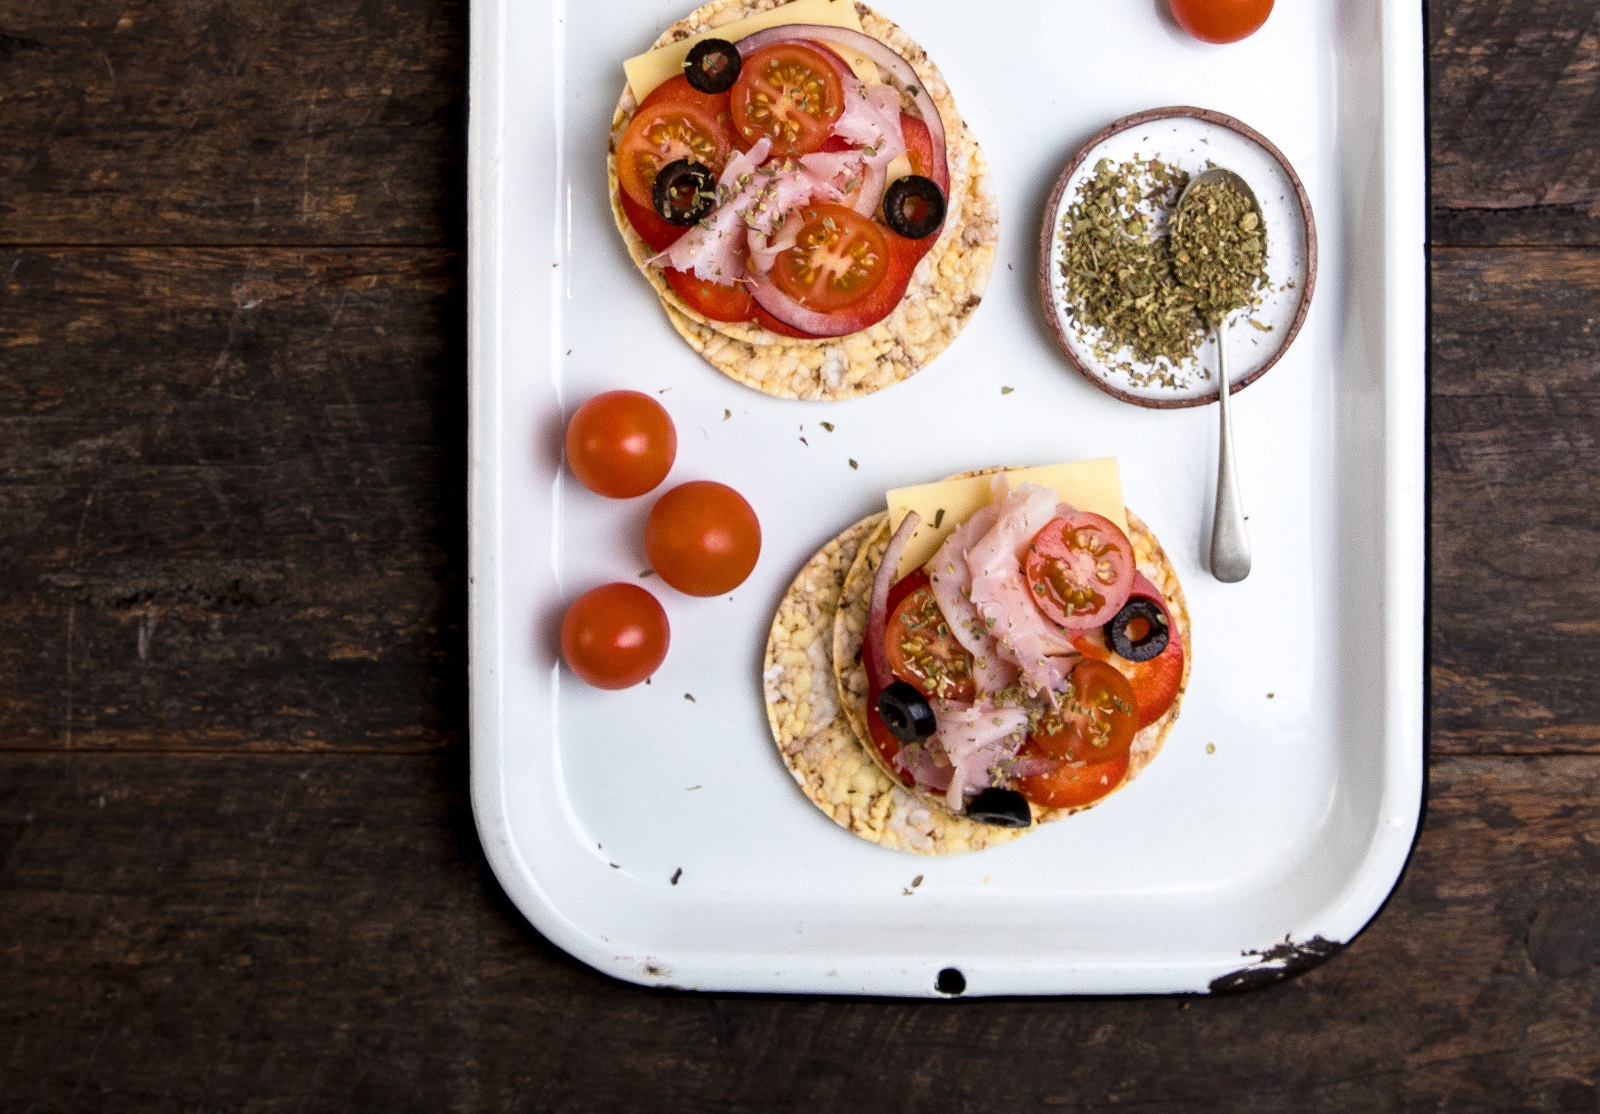 CORN THINS slices with ham, cheese, tomato & olives